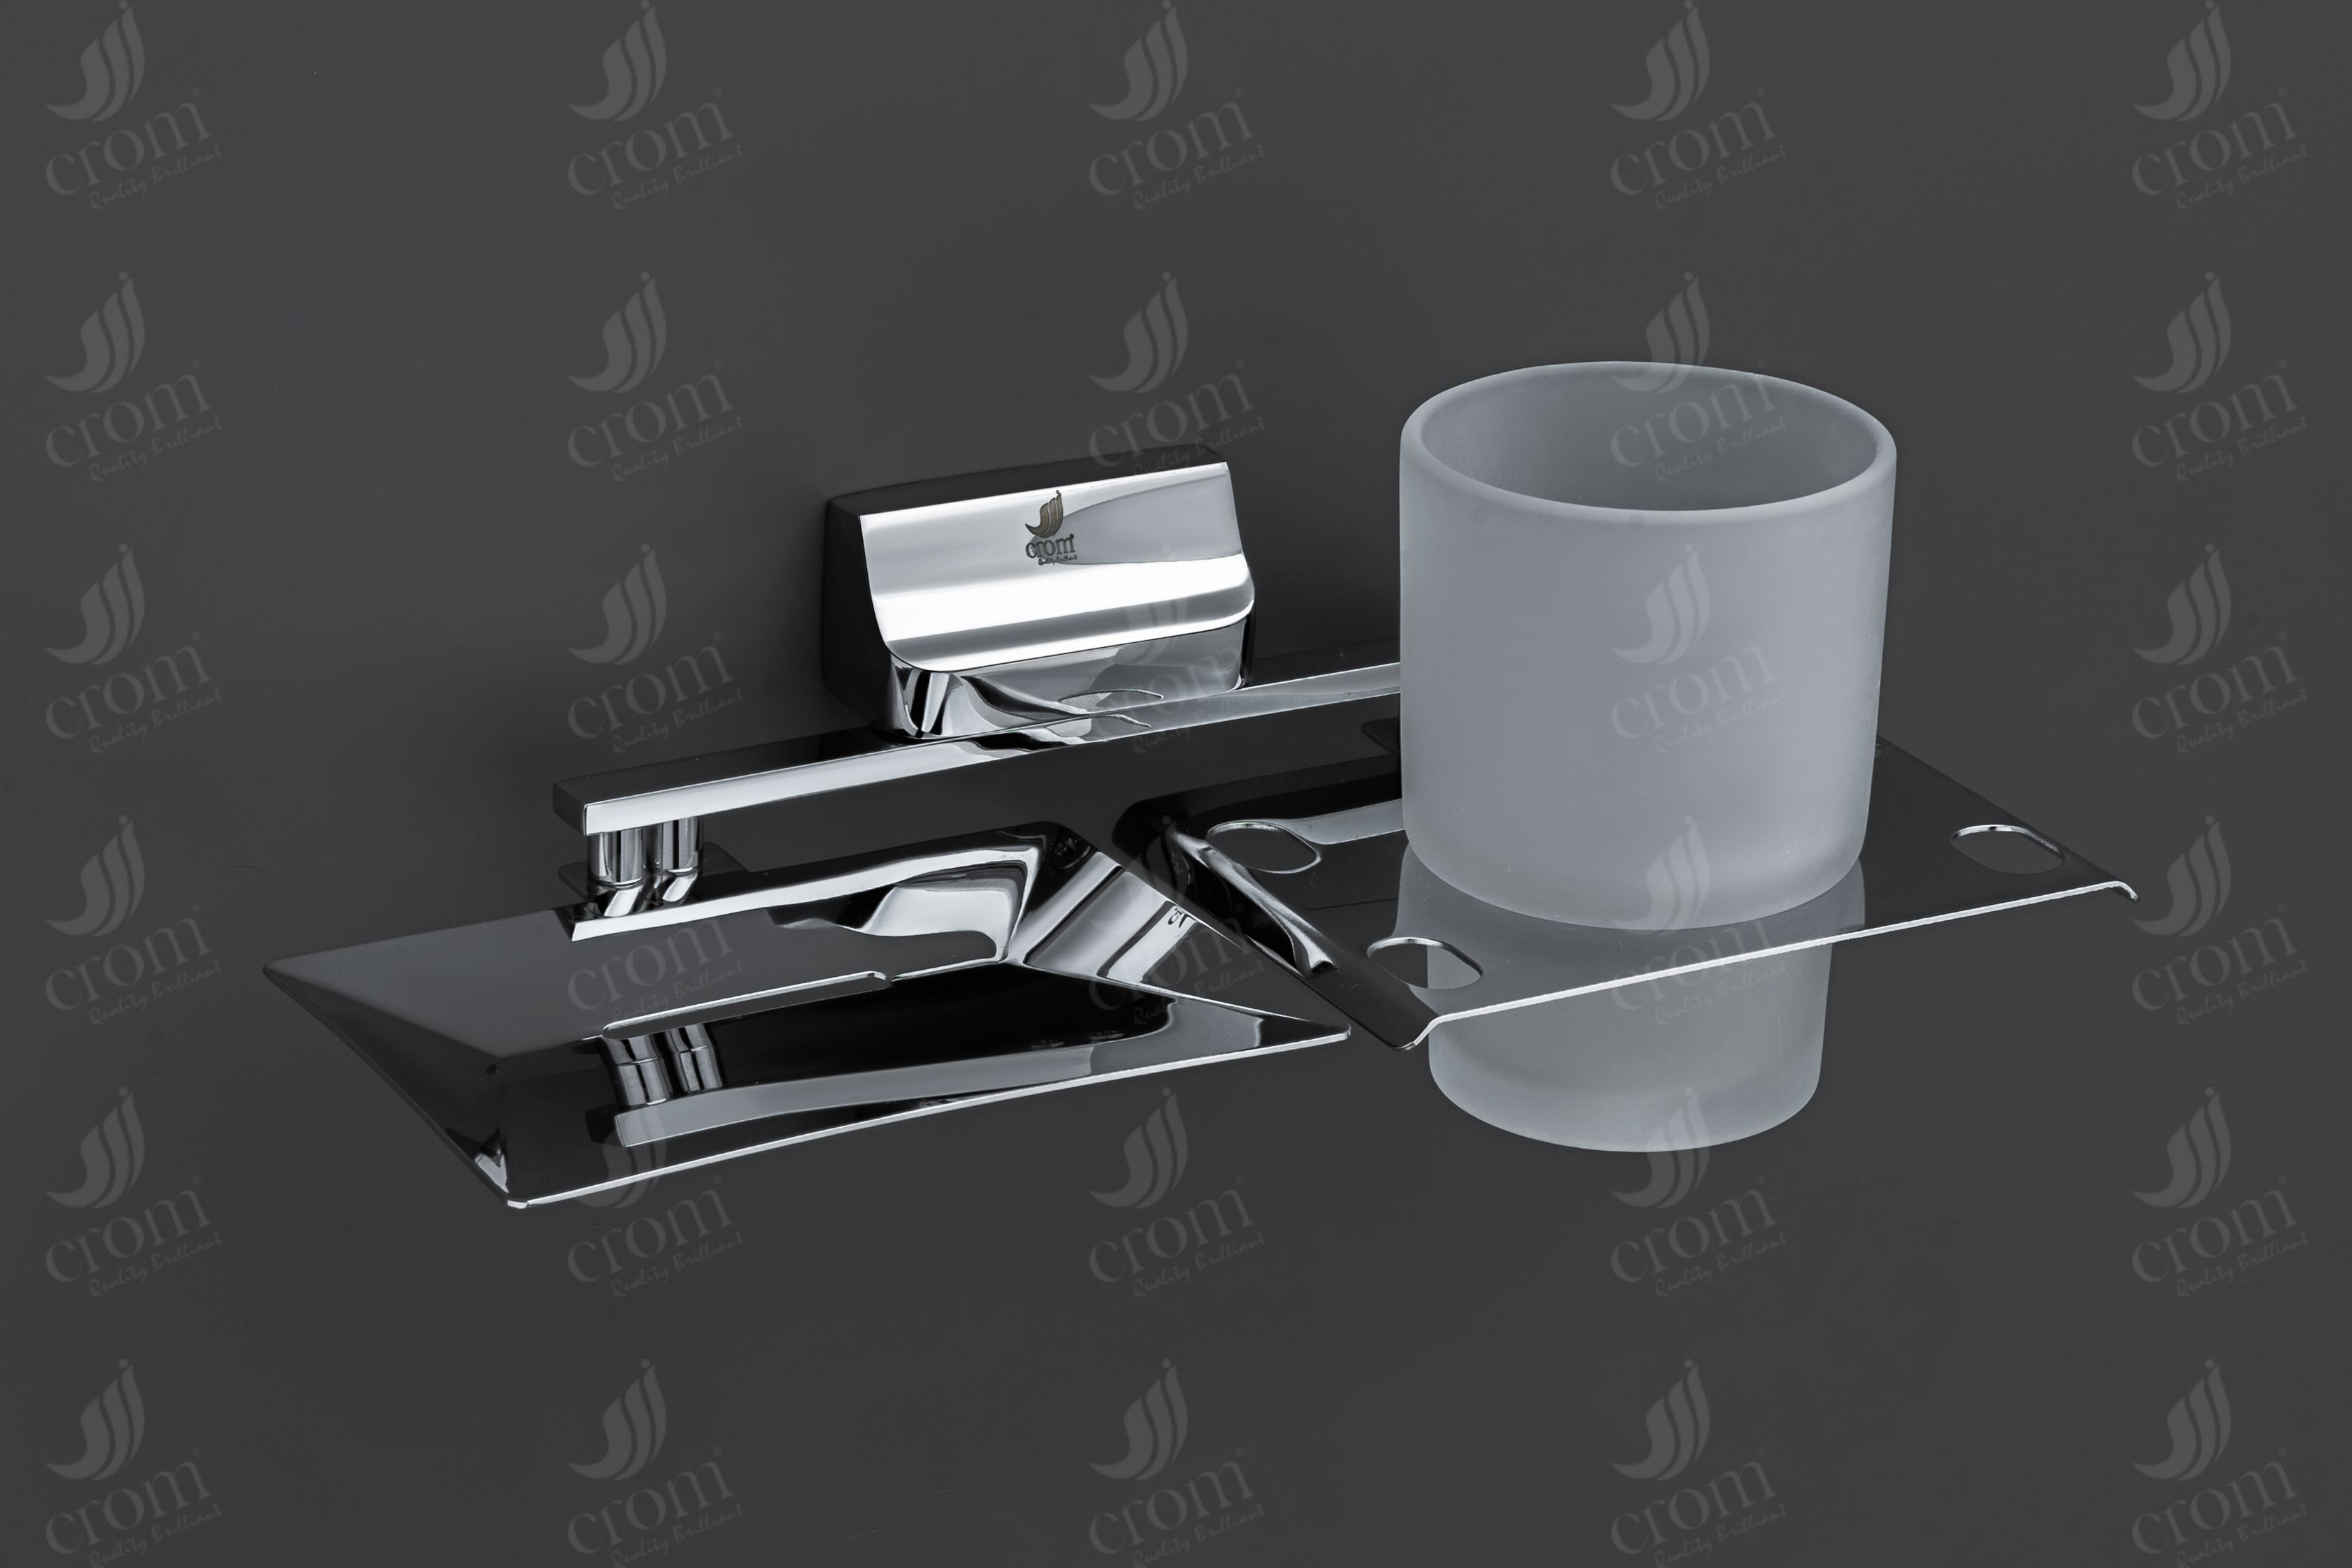 Stainless Steel Tumbler Holder With Soap Dish